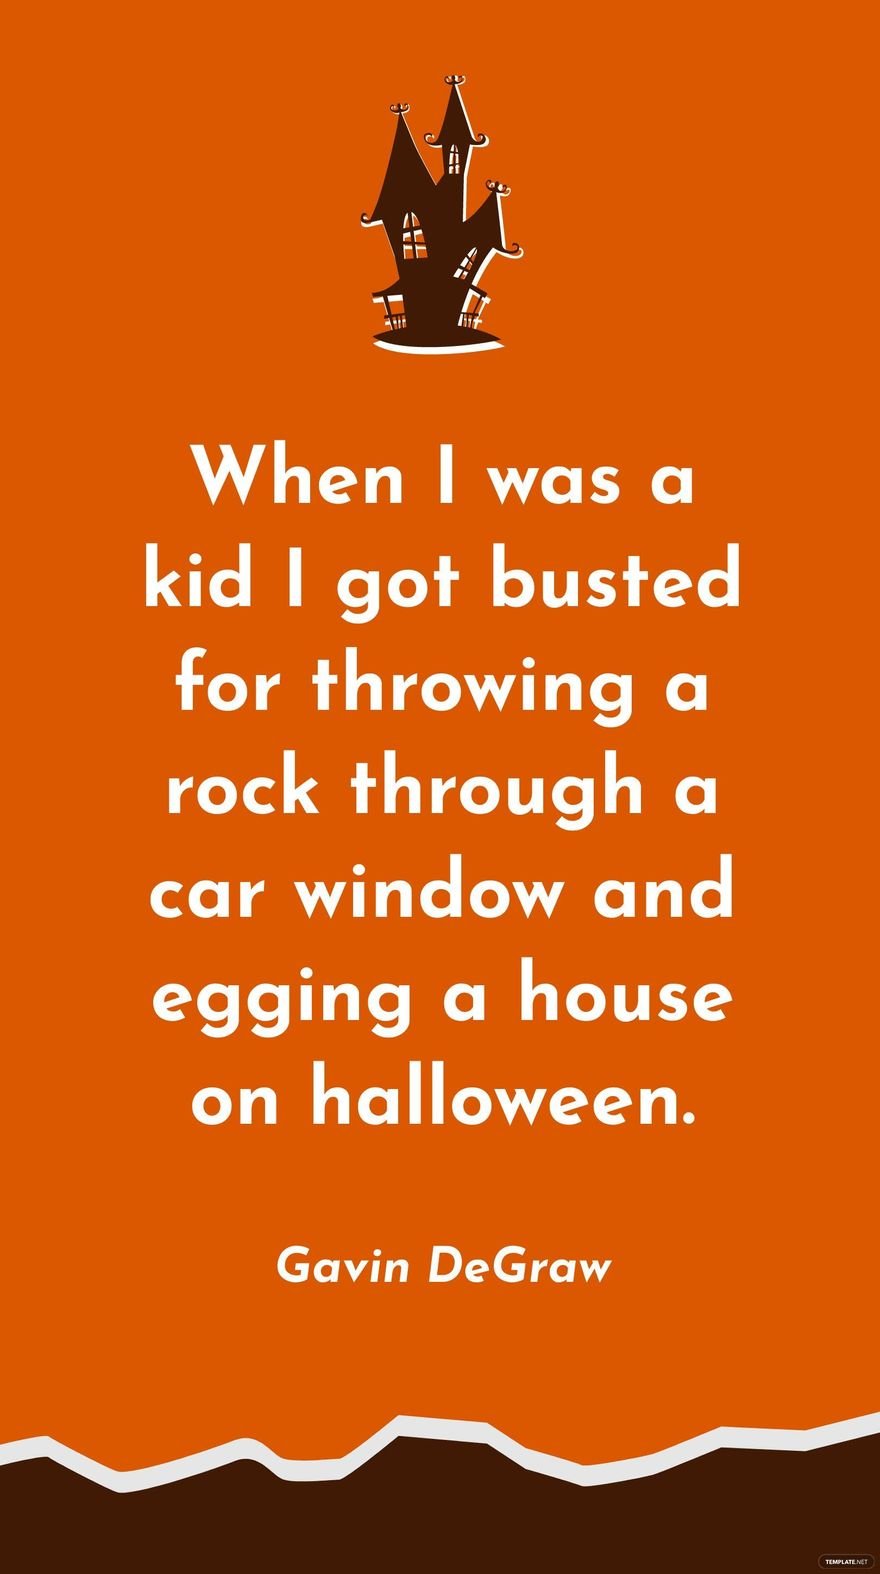 Gavin DeGraw - When I was a kid I got busted for throwing a rock through a car window and egging a house on halloween.